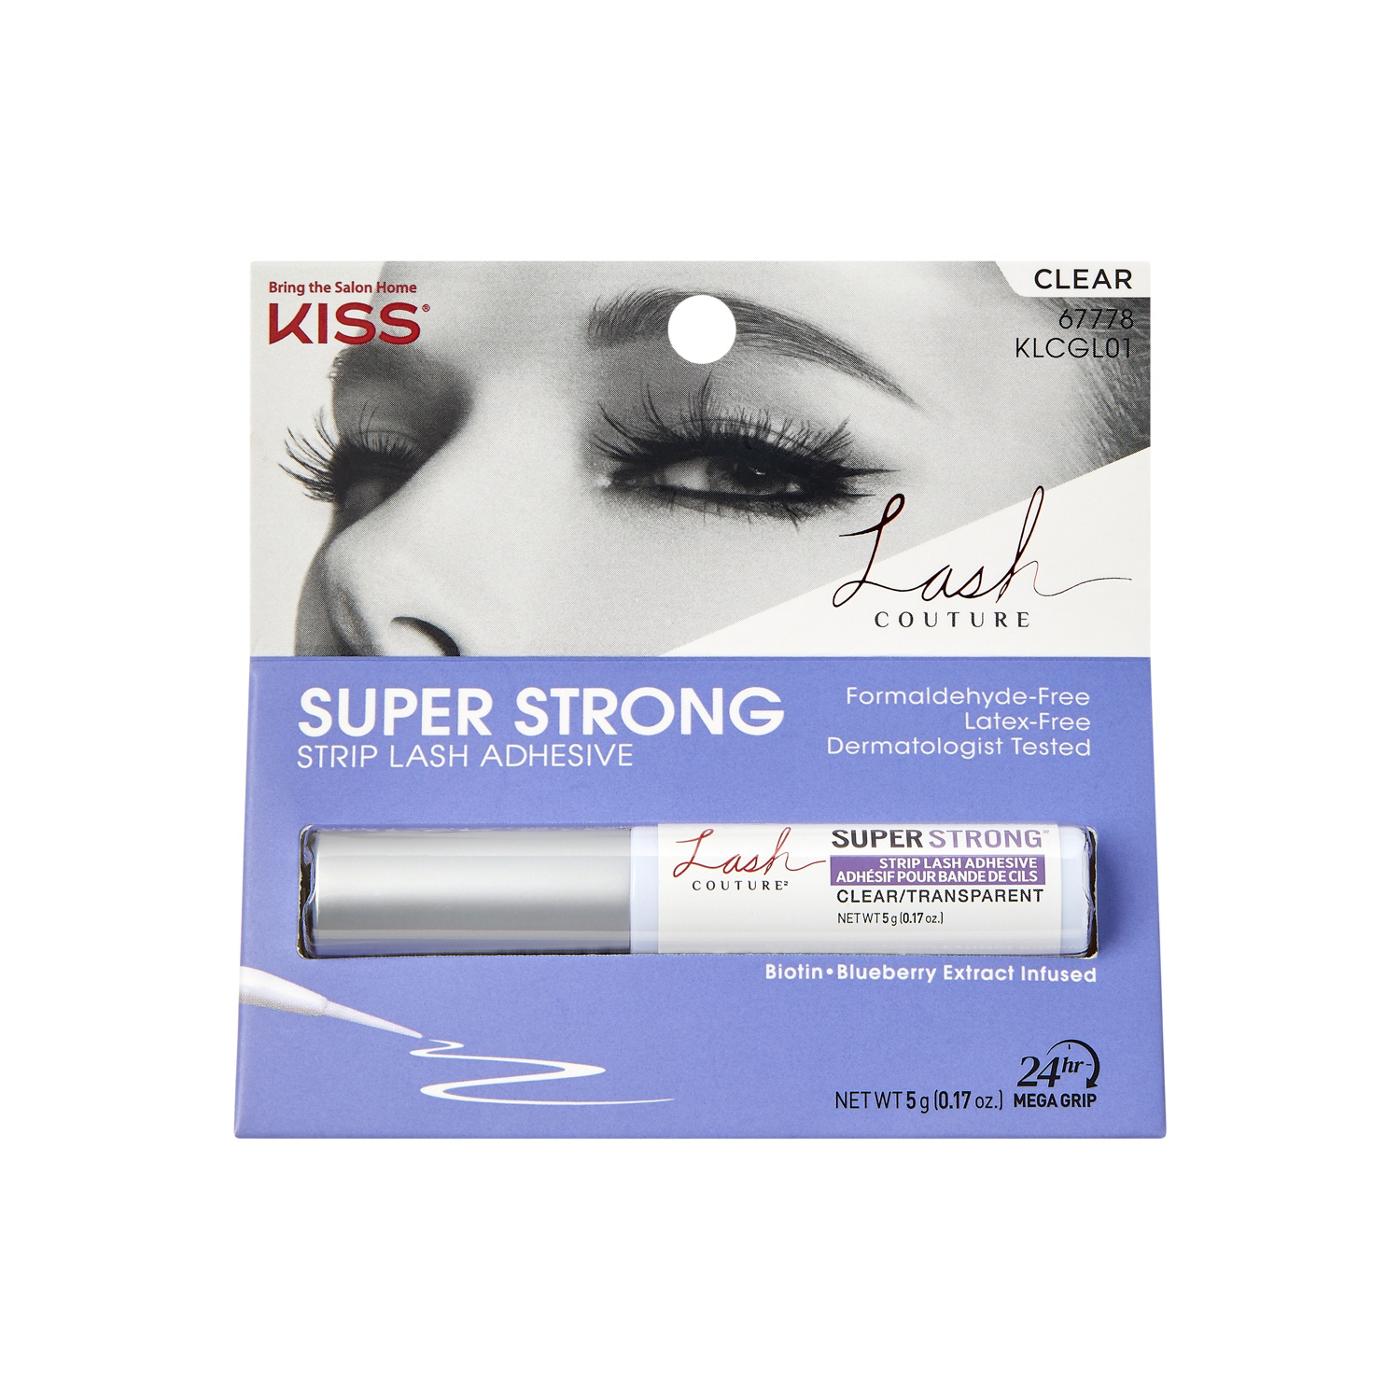 KISS Lash Couture Super Strong Strip Lash Adhesive - Clear; image 1 of 5